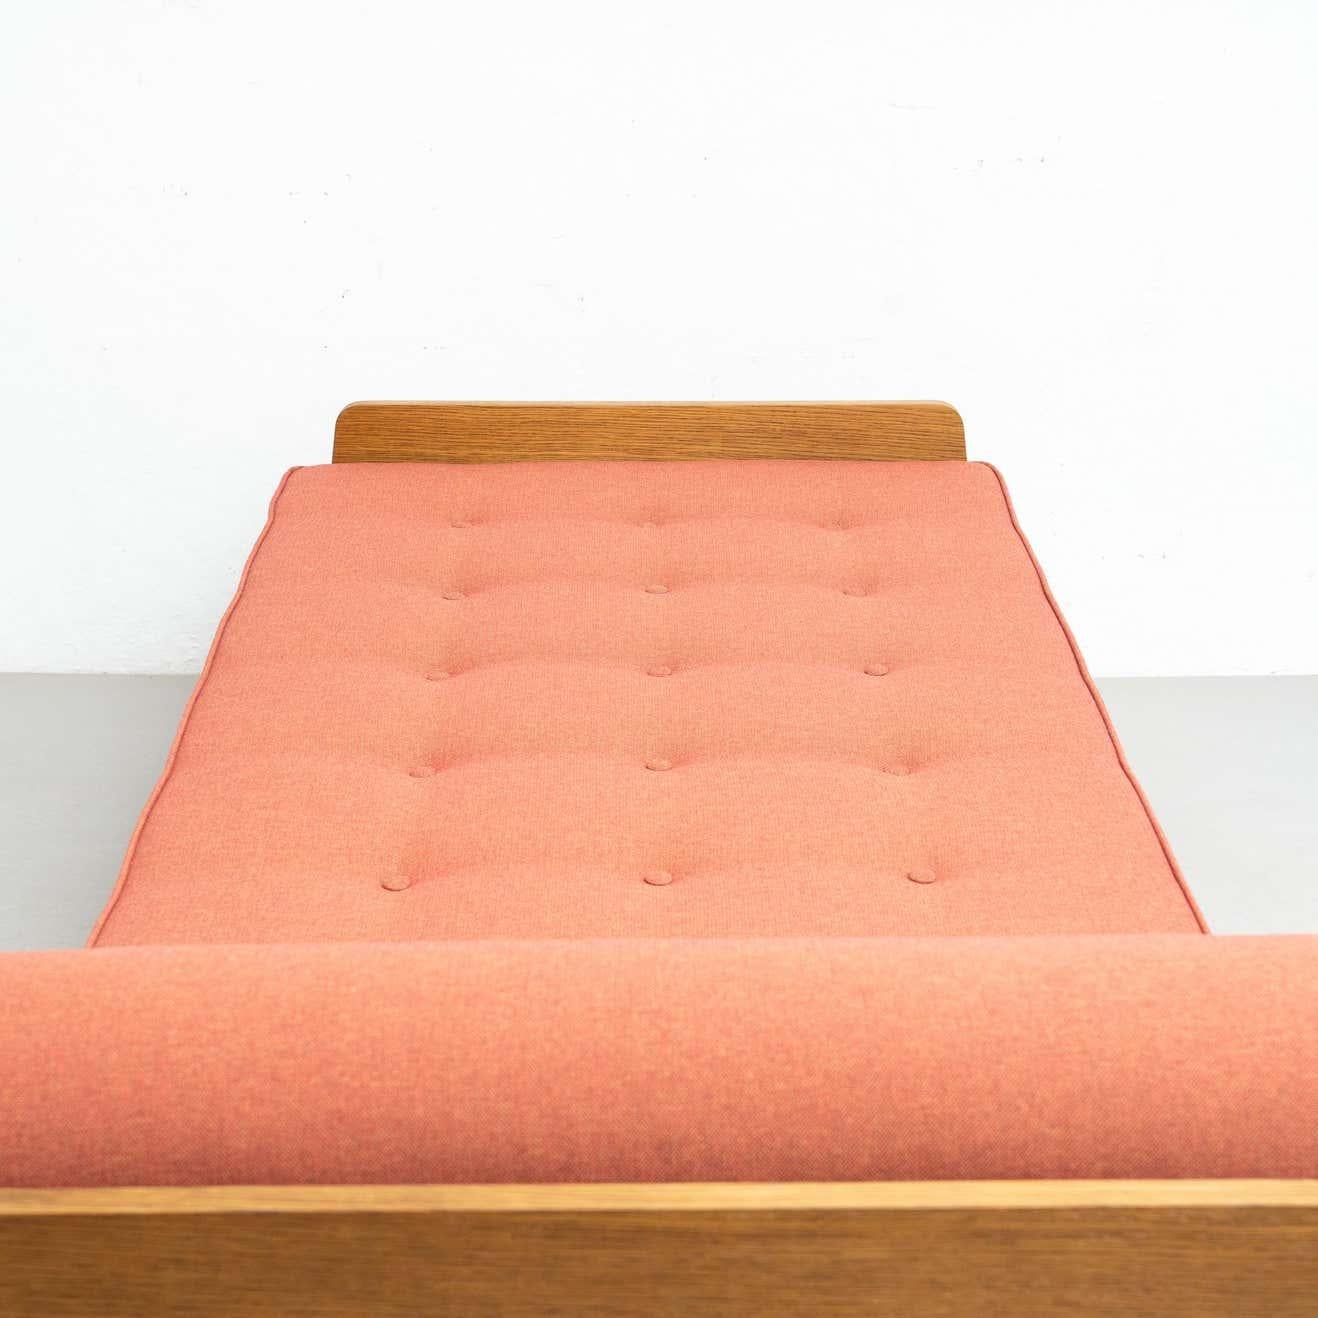 S.C.A.L. daybed designed by Jean Prouvé.
Manufactured by Ateliers Prouve, France, circa 1950.

This bed has been restored.
Metal frame, new upholstery, repainted.
Table had been done new according to original measurements.

In good condition,